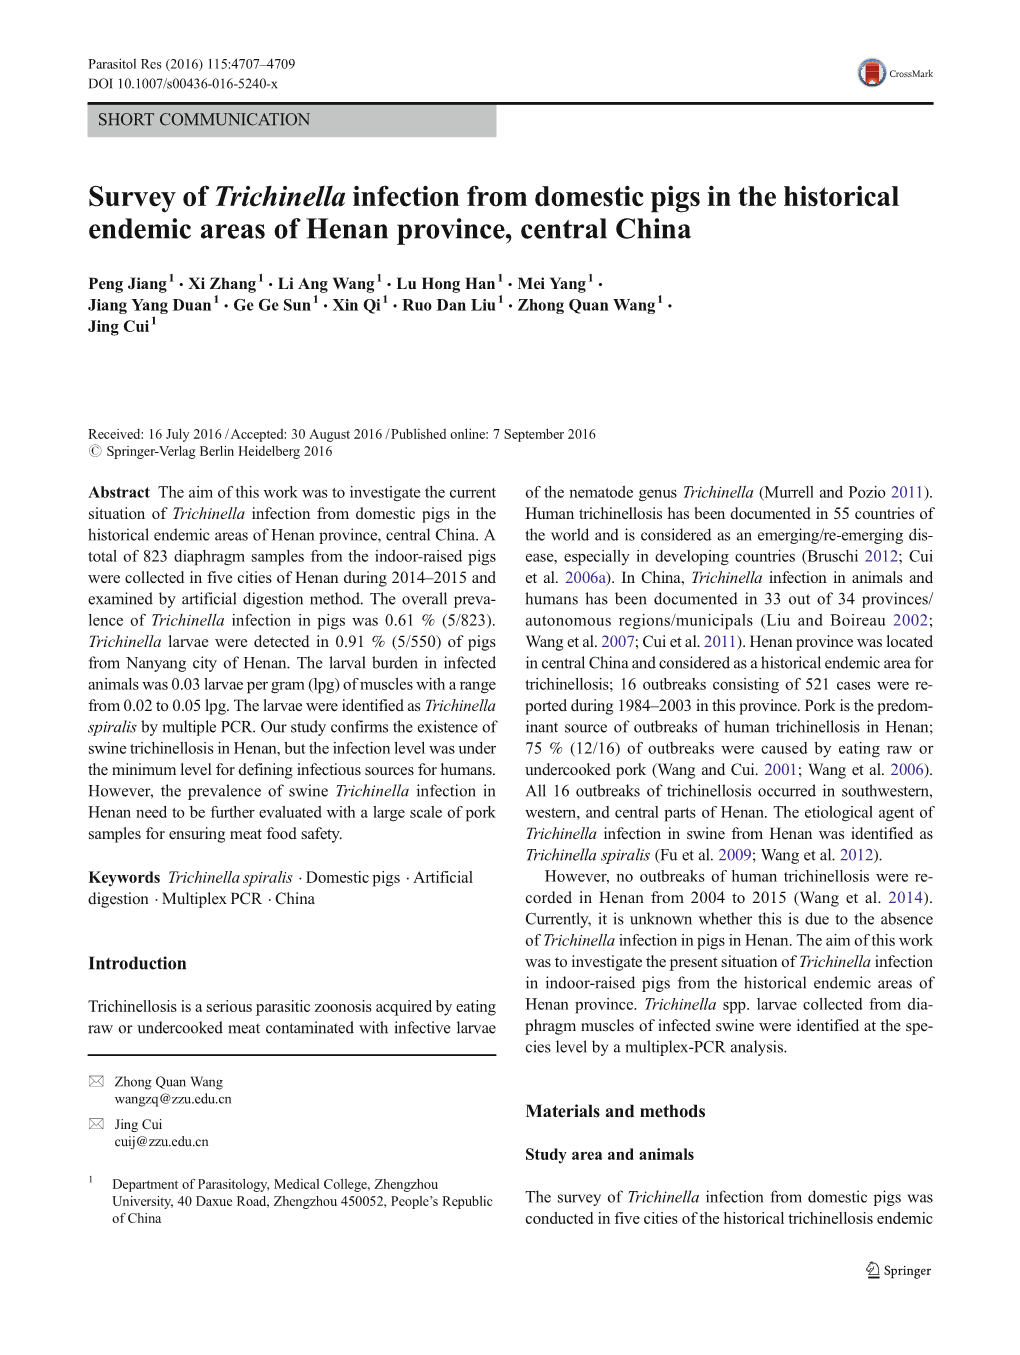 Survey of Trichinella Infection from Domestic Pigs in the Historical Endemic Areas of Henan Province, Central China